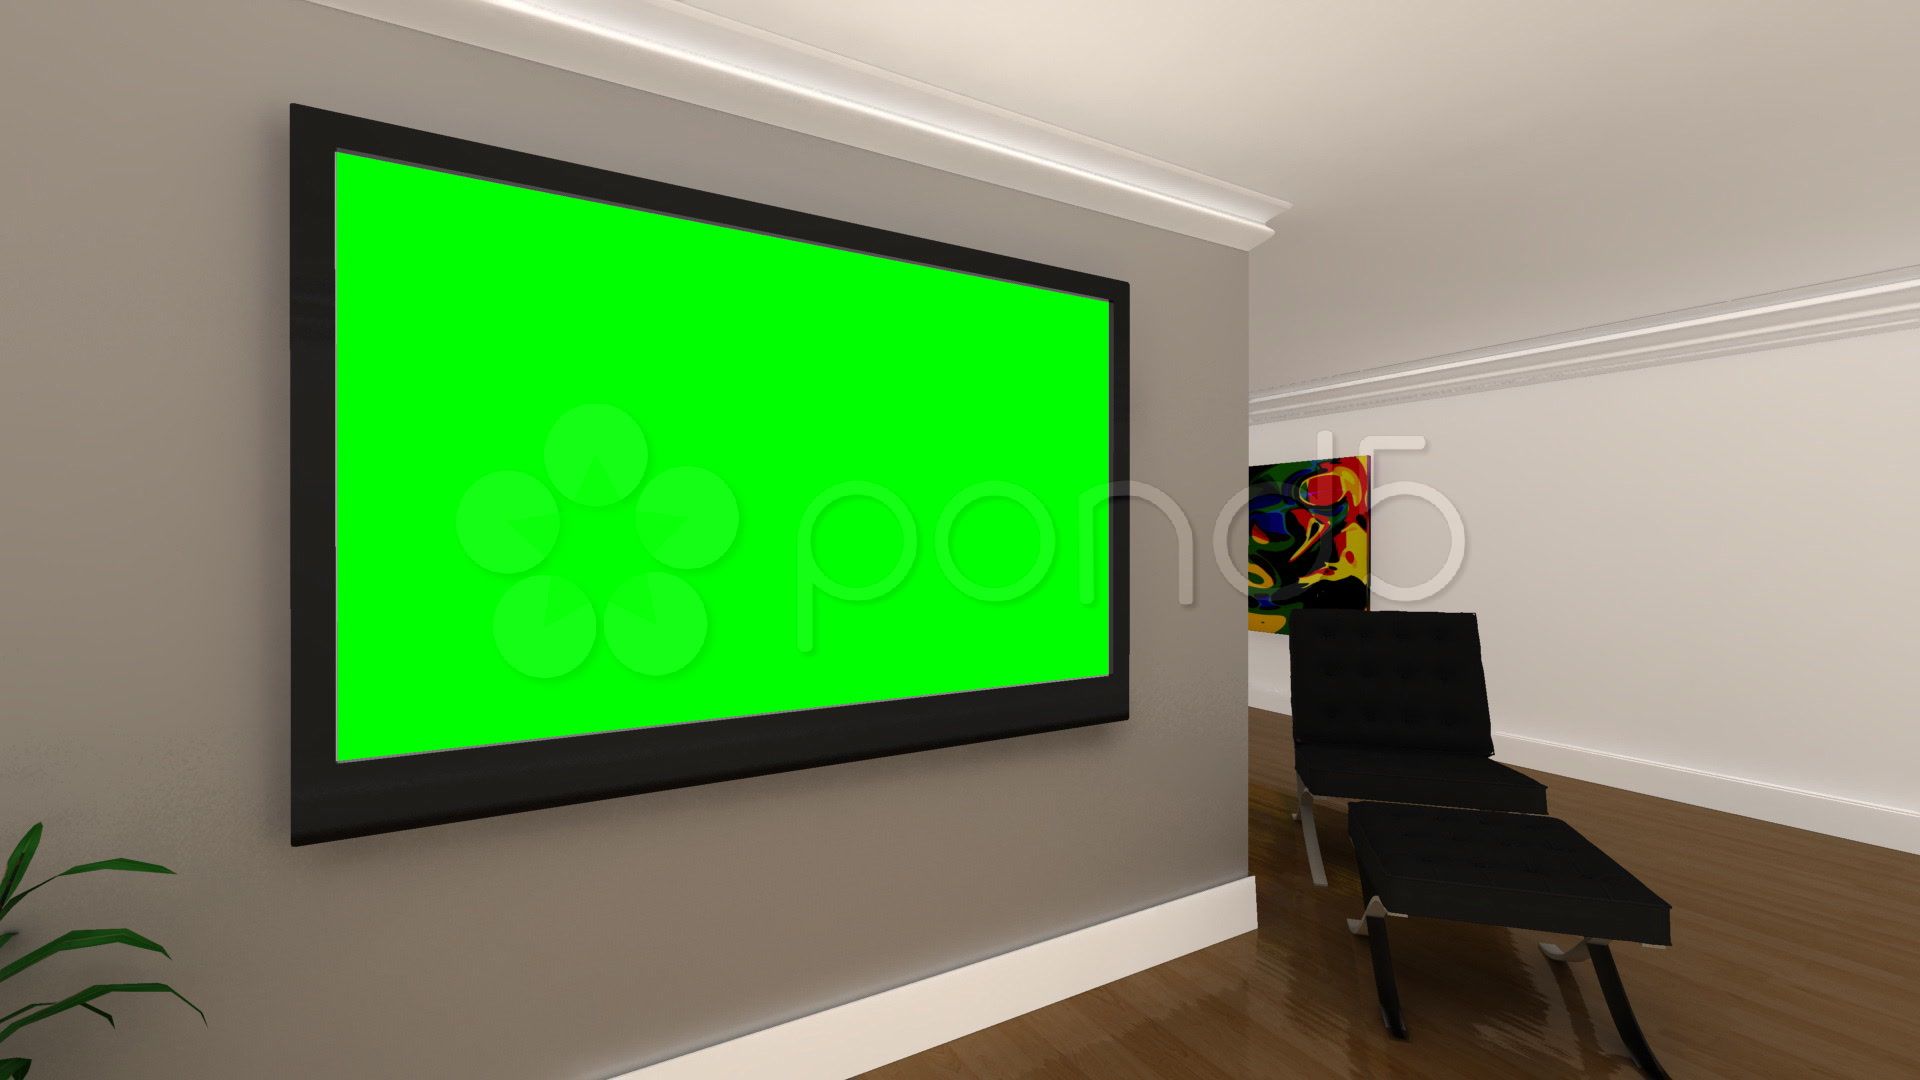 Green Screen Background Interior Office Stock Footage #AD , #Background#Screen#Interior#Green. Green screen background, Greenscreen, Green screen backdrop